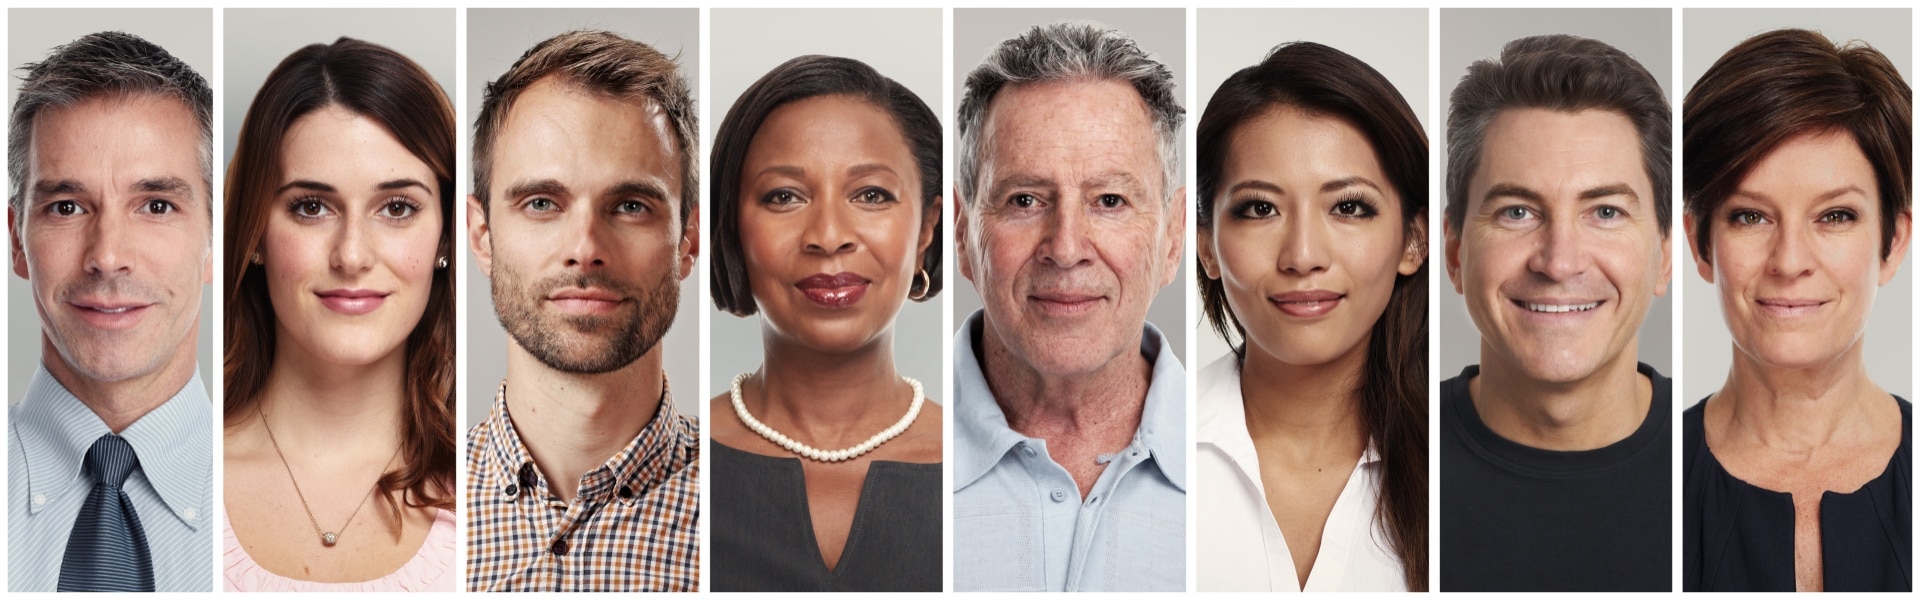 Client Personas for Financial Advisors represented by a close up of a group of individual faces